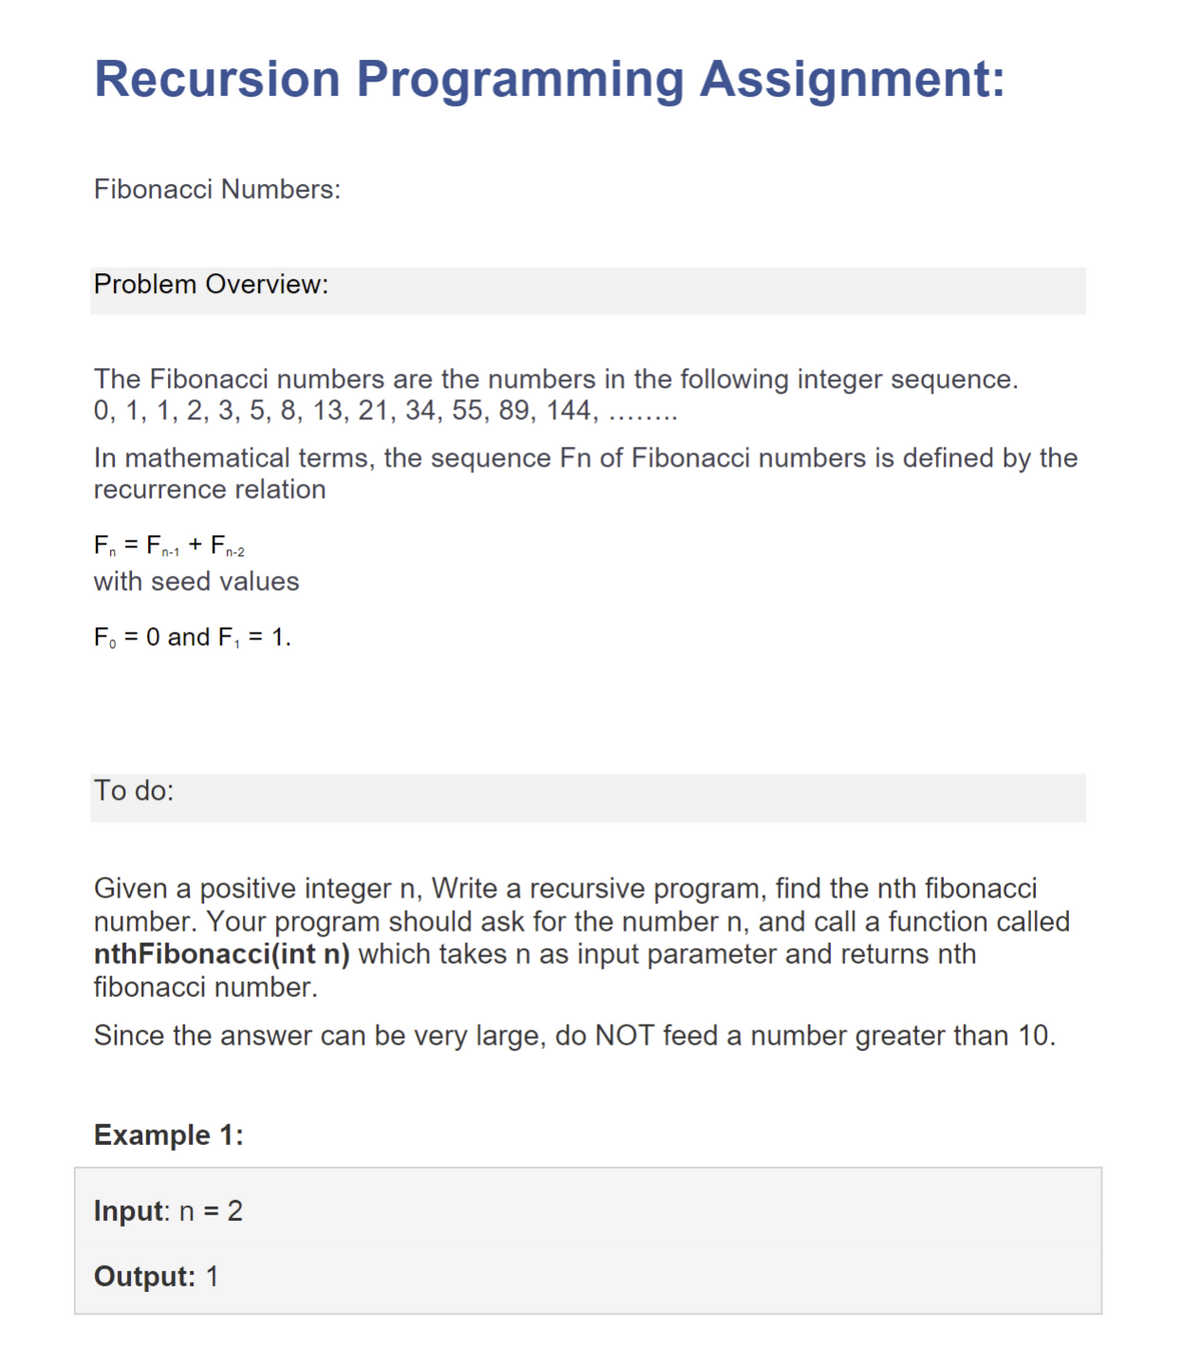 Recursion Programming Assignment:
Fibonacci Numbers:
Problem Overview:
The Fibonacci numbers are the numbers in the following integer sequence.
0, 1, 1, 2, 3, 5, 8, 13, 21, 34, 55, 89, 144, ....
In mathematical terms, the sequence Fn of Fibonacci numbers is defined by the
recurrence relation
F₁ = Fn-1 + Fn-2
with seed values
F₁ = 0 and F₁ = 1.
To do:
Given a positive integer n, Write a recursive program, find the nth fibonacci
number. Your program should ask for the number n, and call a function called
nthFibonacci(int n) which takes n as input parameter and returns nth
fibonacci number.
Since the answer can be very large, do NOT feed a number greater than 10.
Example 1:
Input: n = 2
Output: 1